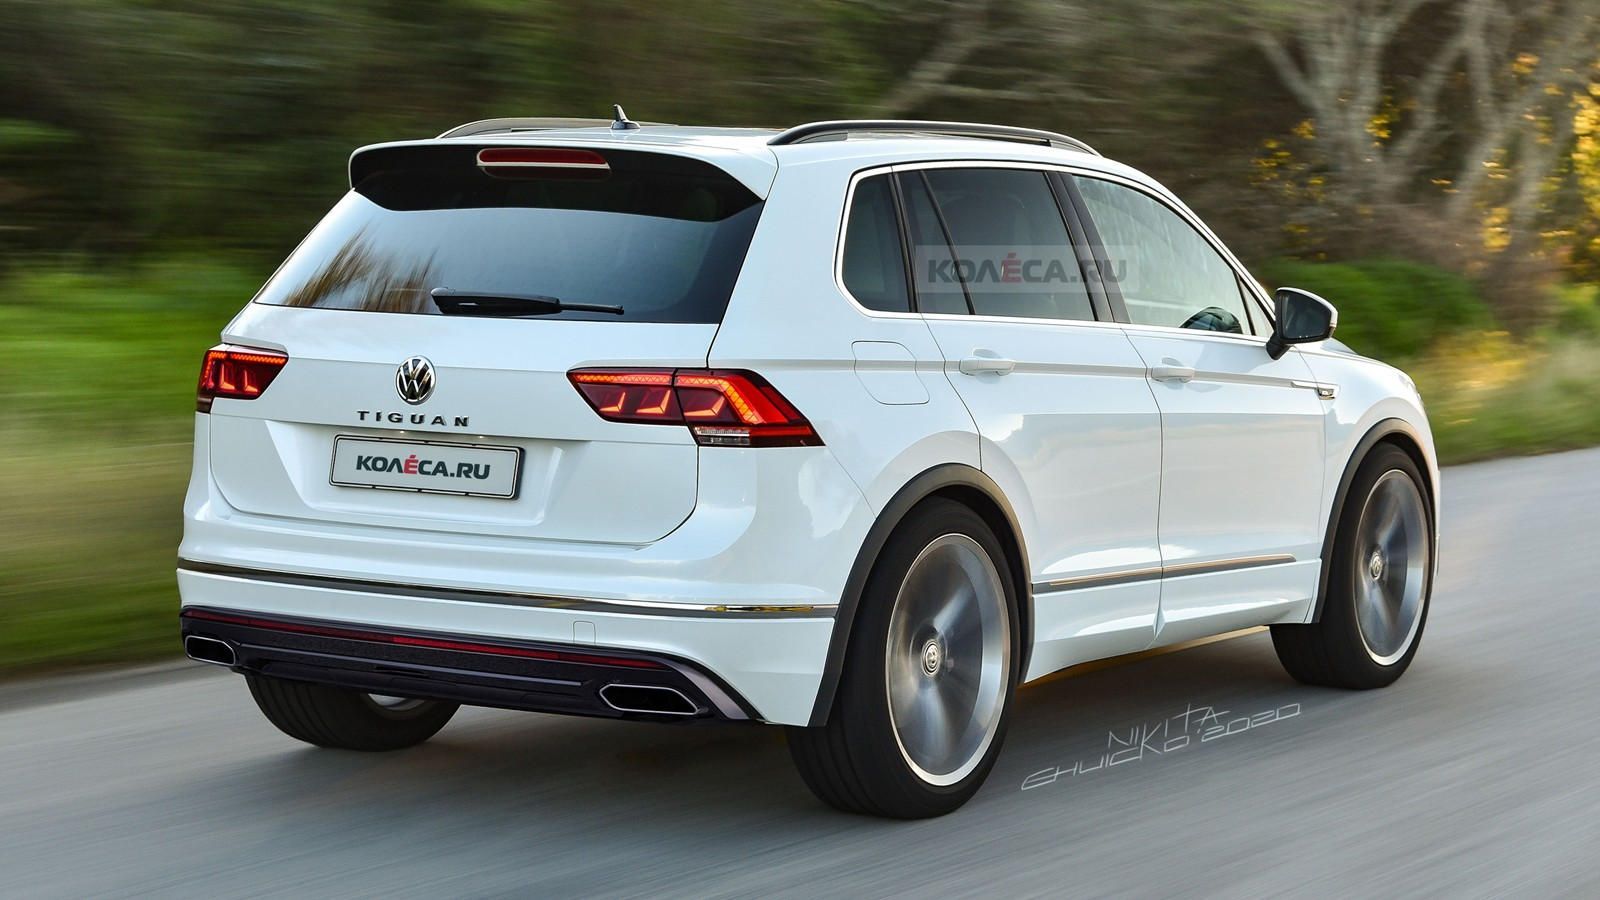 This Is Our Best Look Yet At The 2021 VW Tiguan. We're expecting the Volkswagen Tiguan facelift to debut at Geneva in March. Volkswagen, Tiguan vw, Mini van